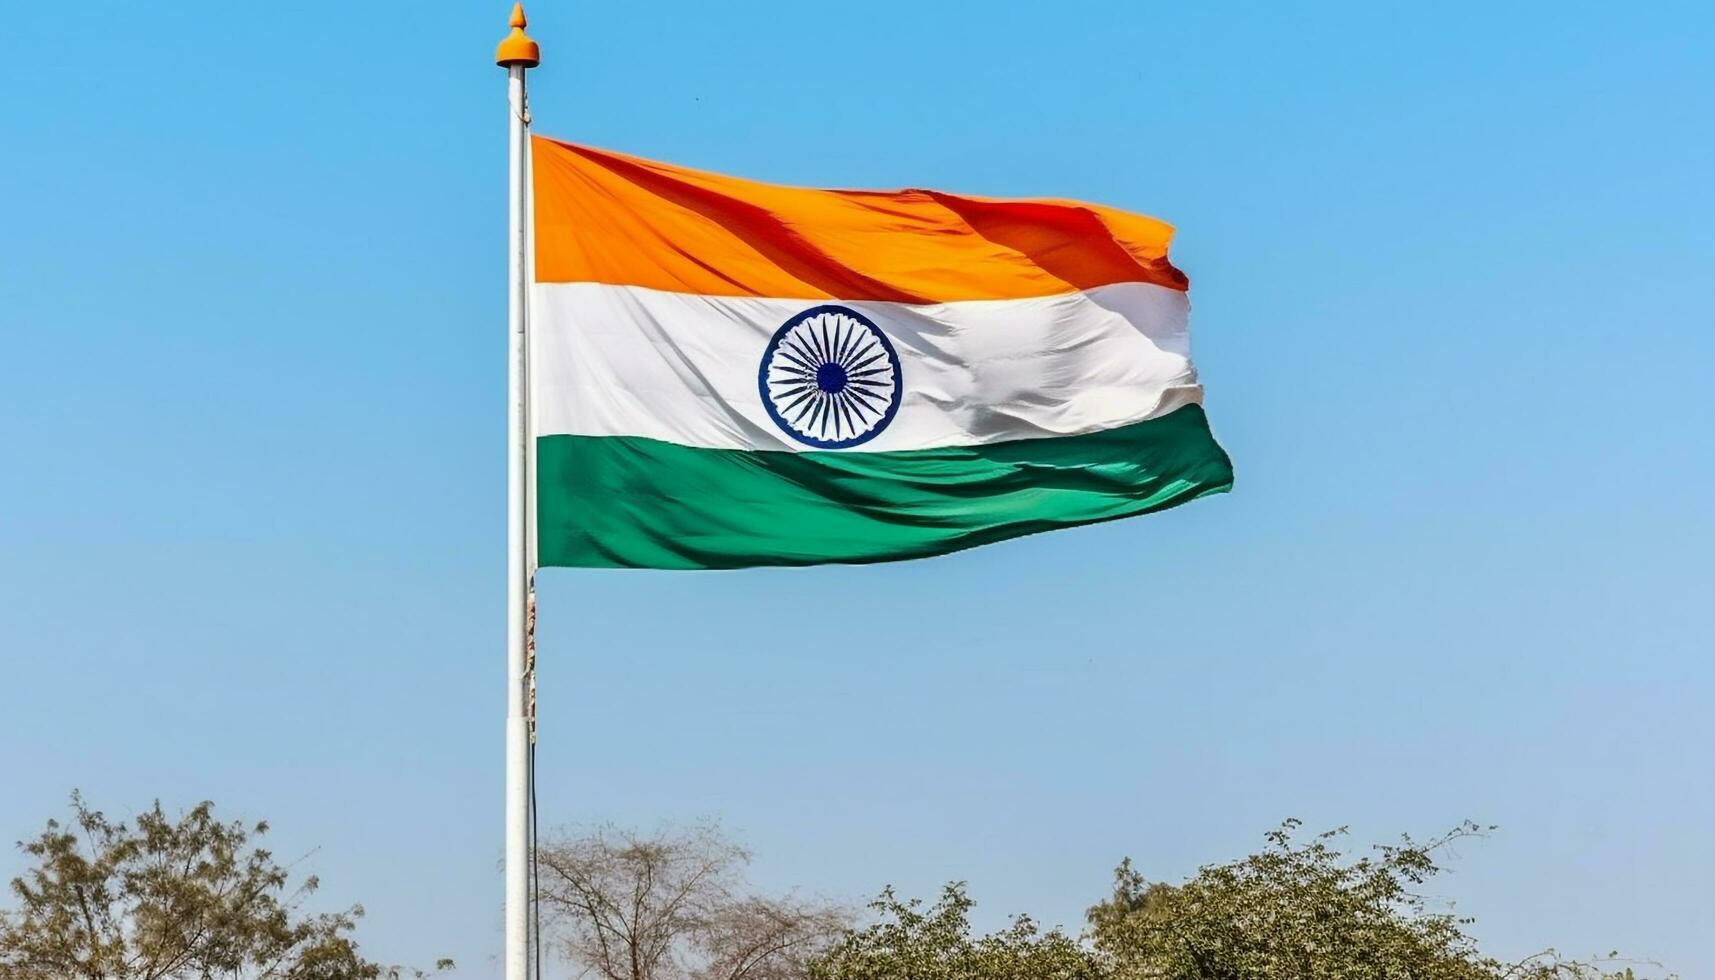 Waving Indian flag symbolizes patriotism, pride, and Indian culture triumph generated by AI photo